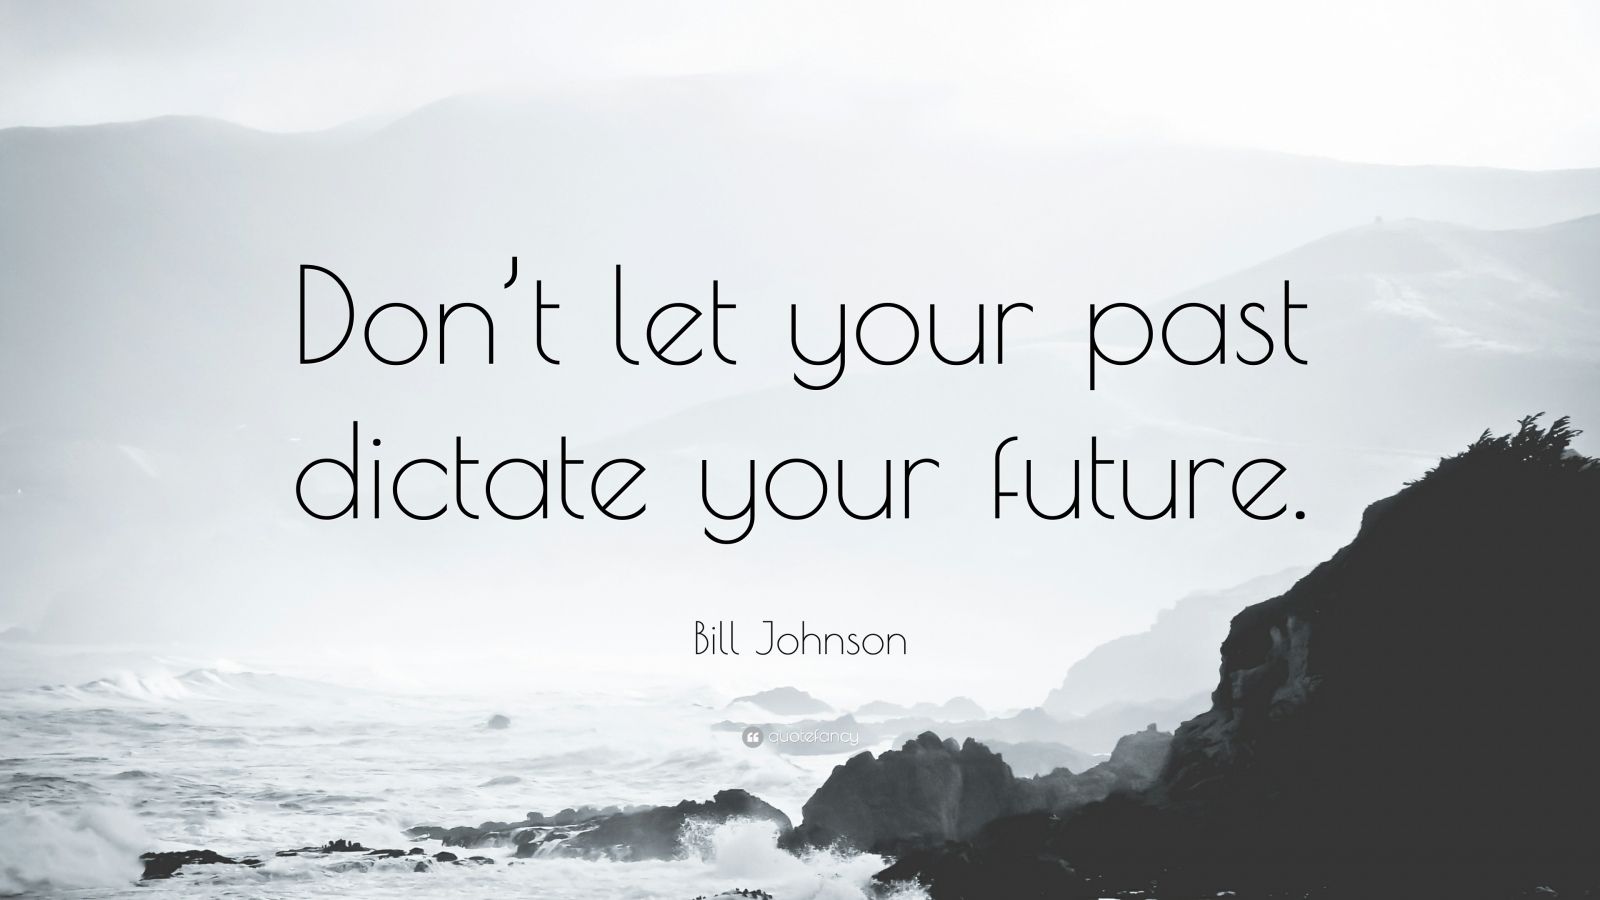 Bill Johnson Quote: “Don't let your past dictate your future.”